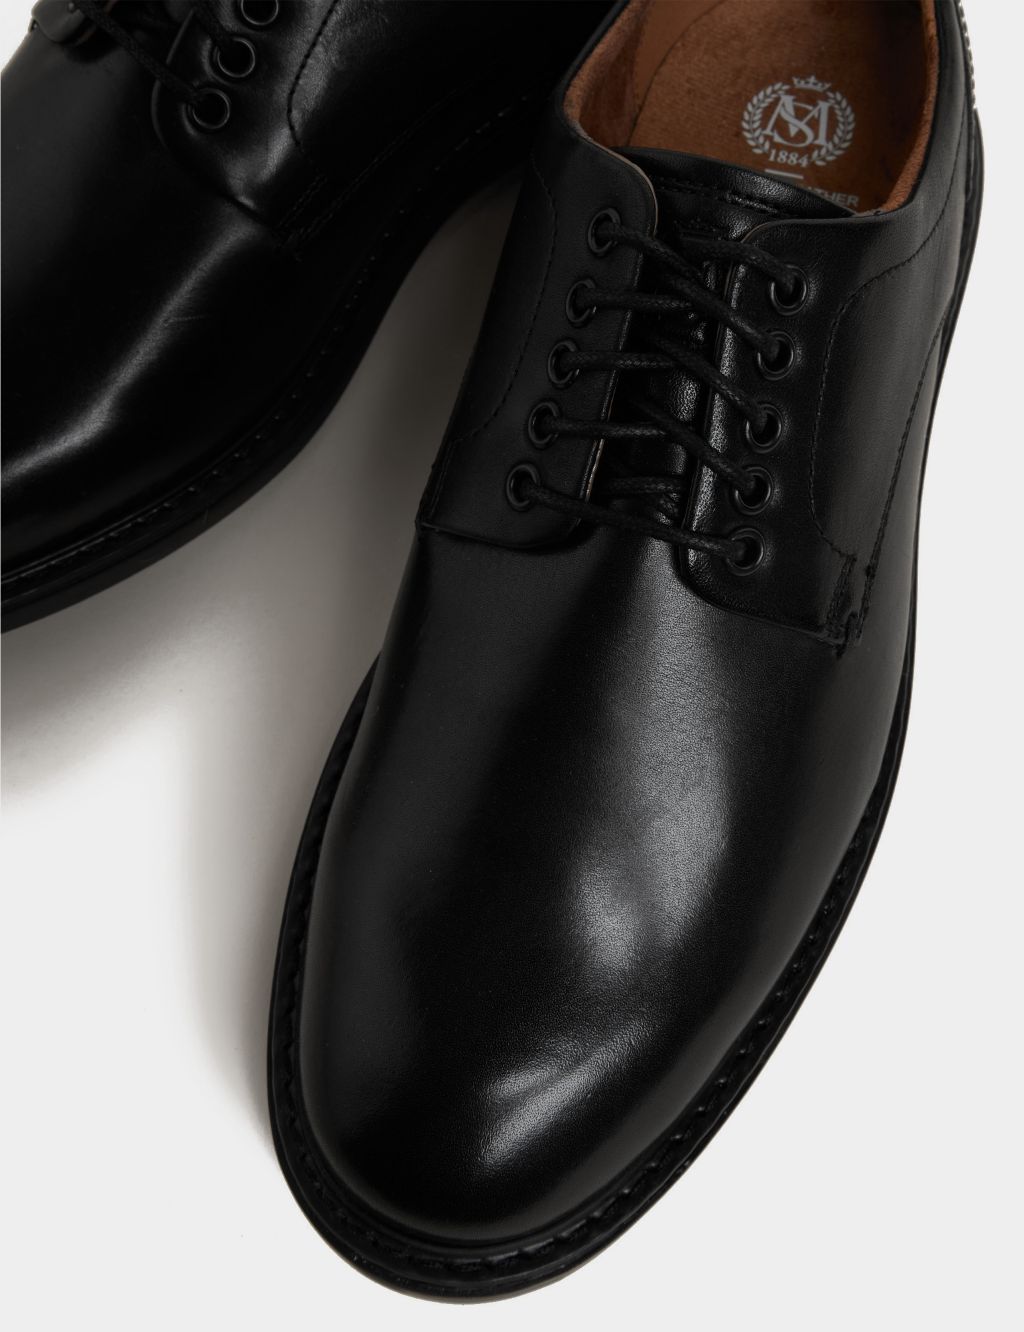 Wide Fit Leather Derby Shoes image 3